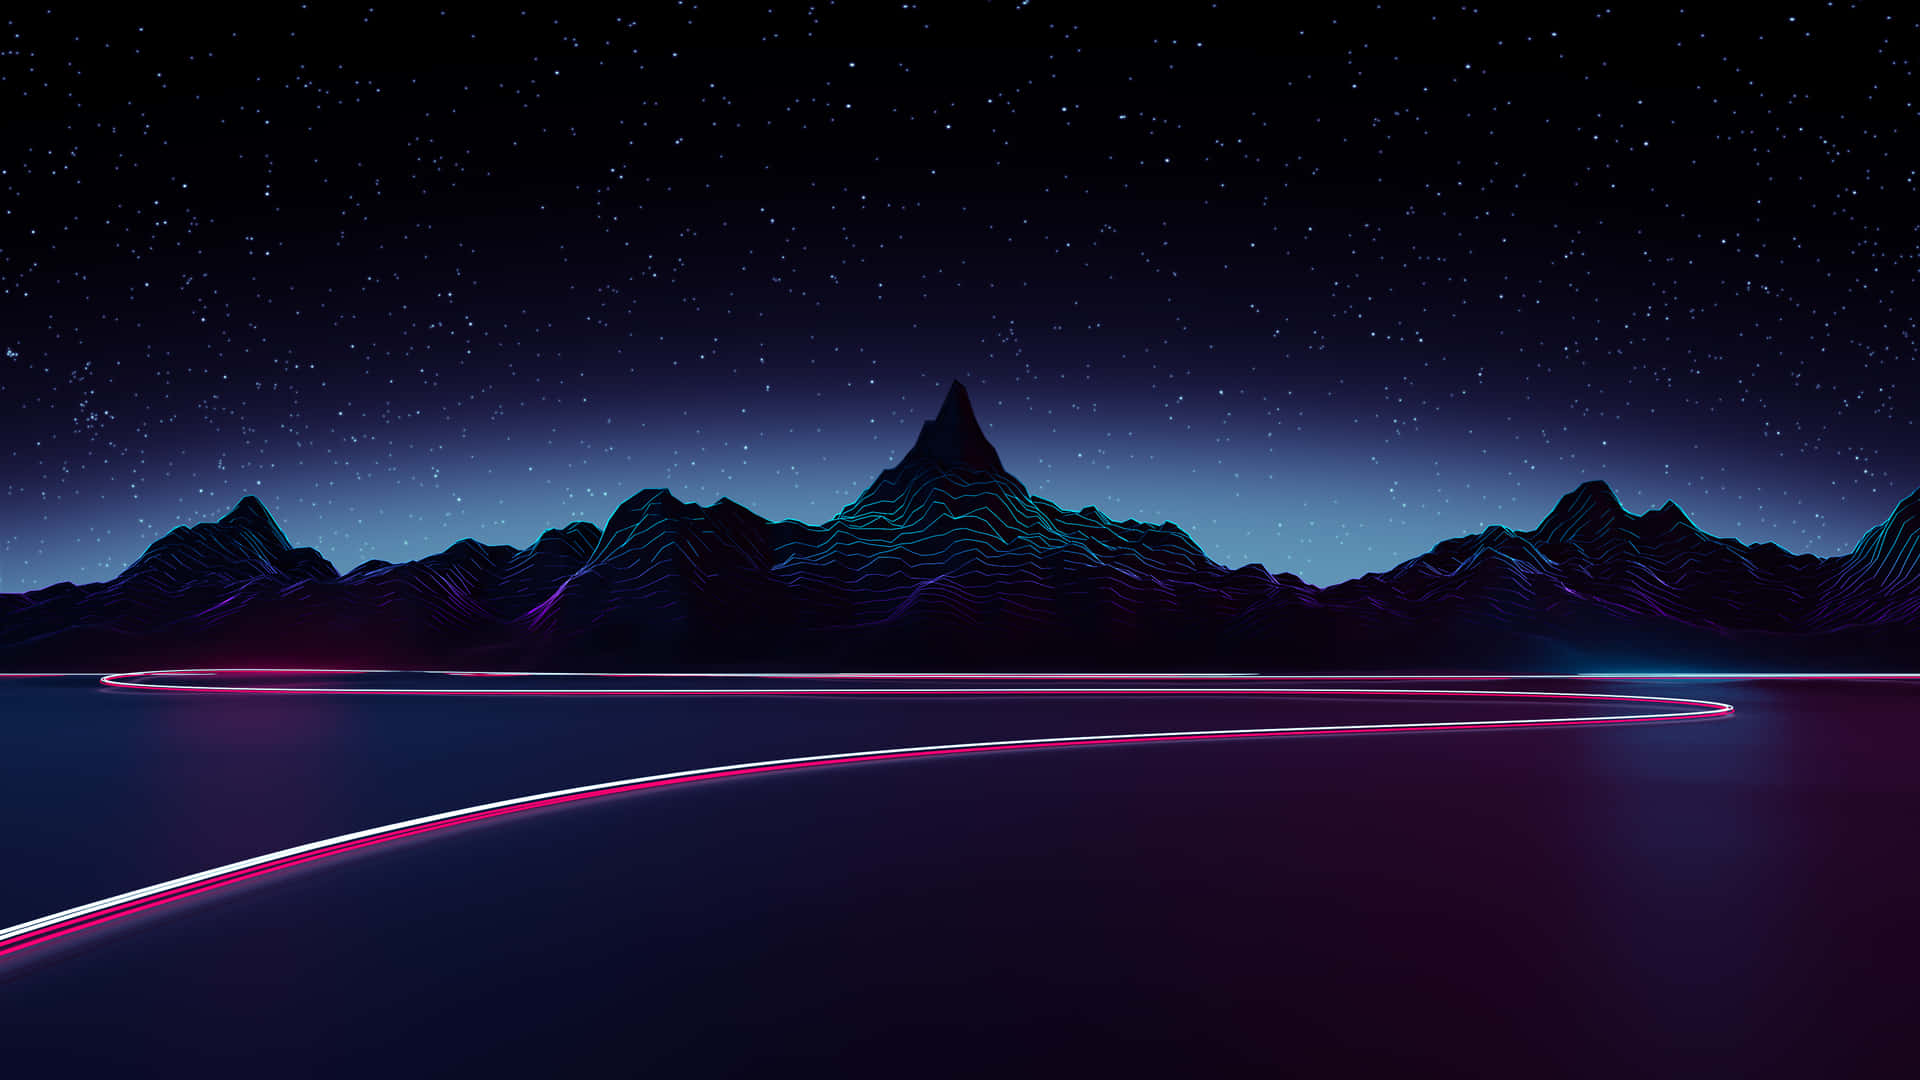 A Neon Light Is Shining Over A Mountain And Lake Background